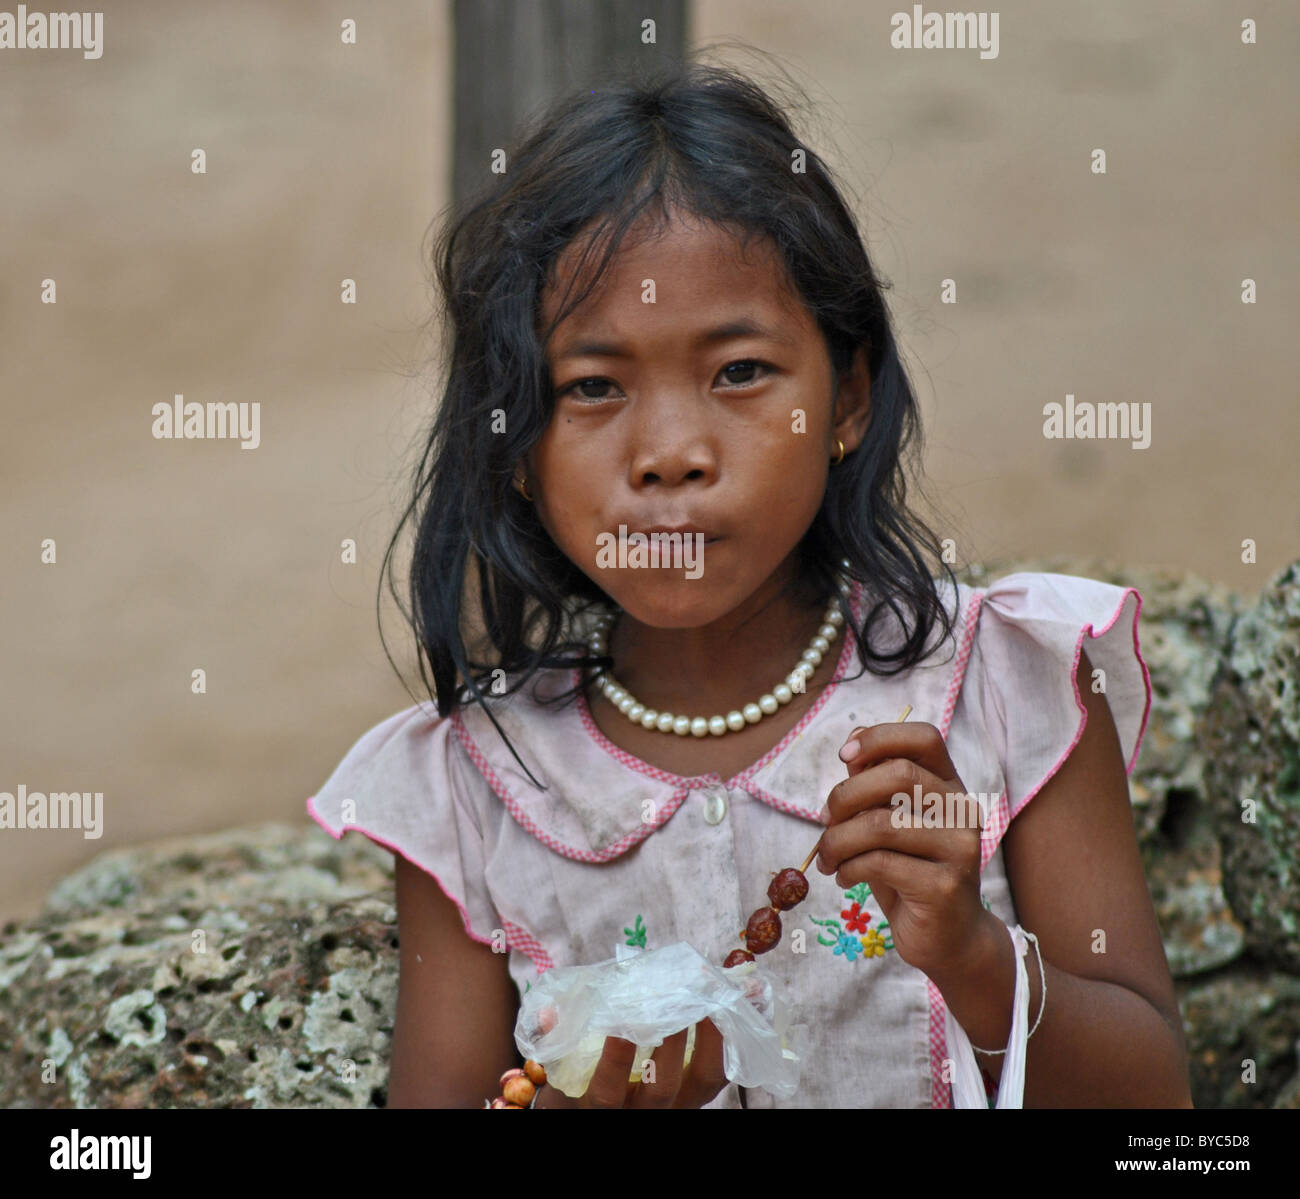 Cambodian girl eating toffees Stock Photo